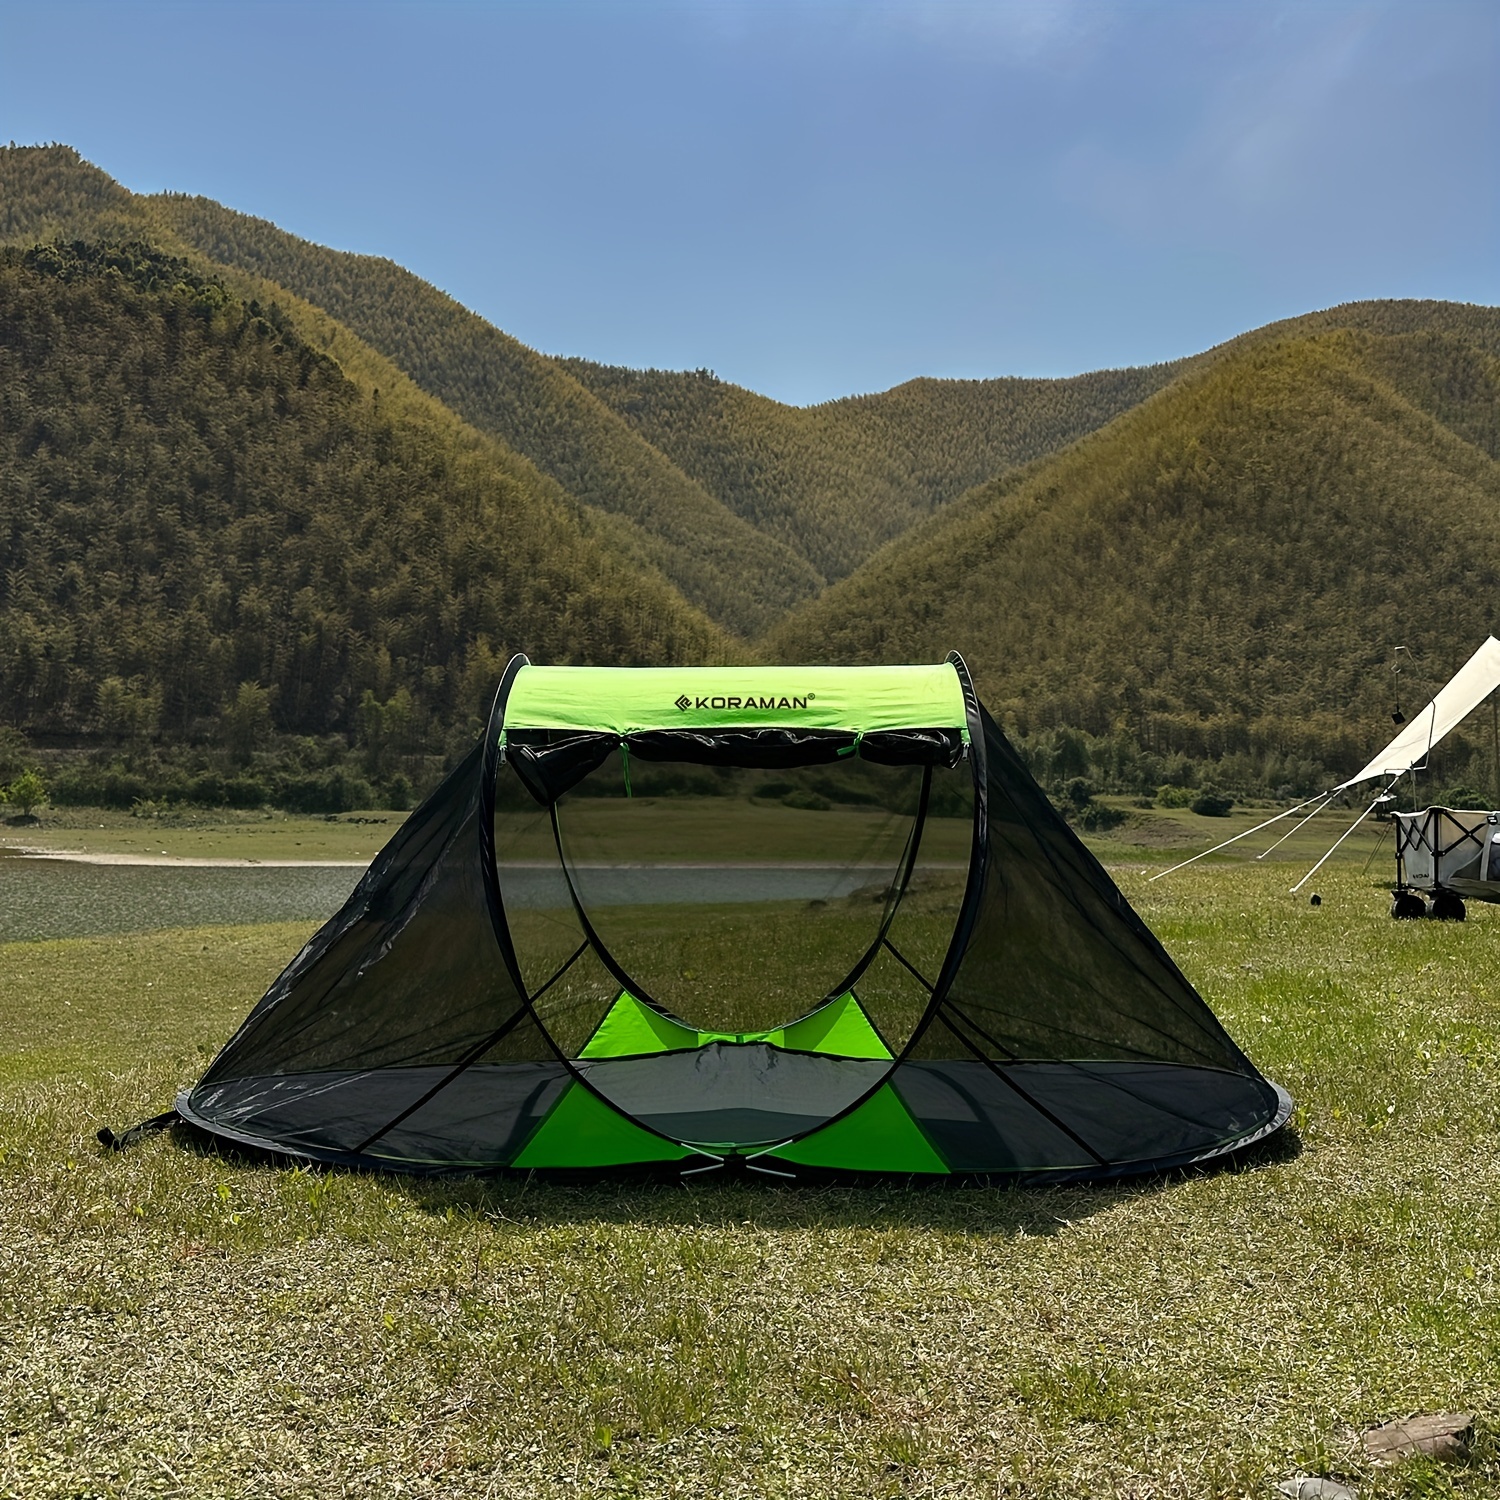 Mosquito Net Ultralightweight Net Mesh Shelter for Camping Backpacking  Hiking Travelling - China Camping Tent and Tent price